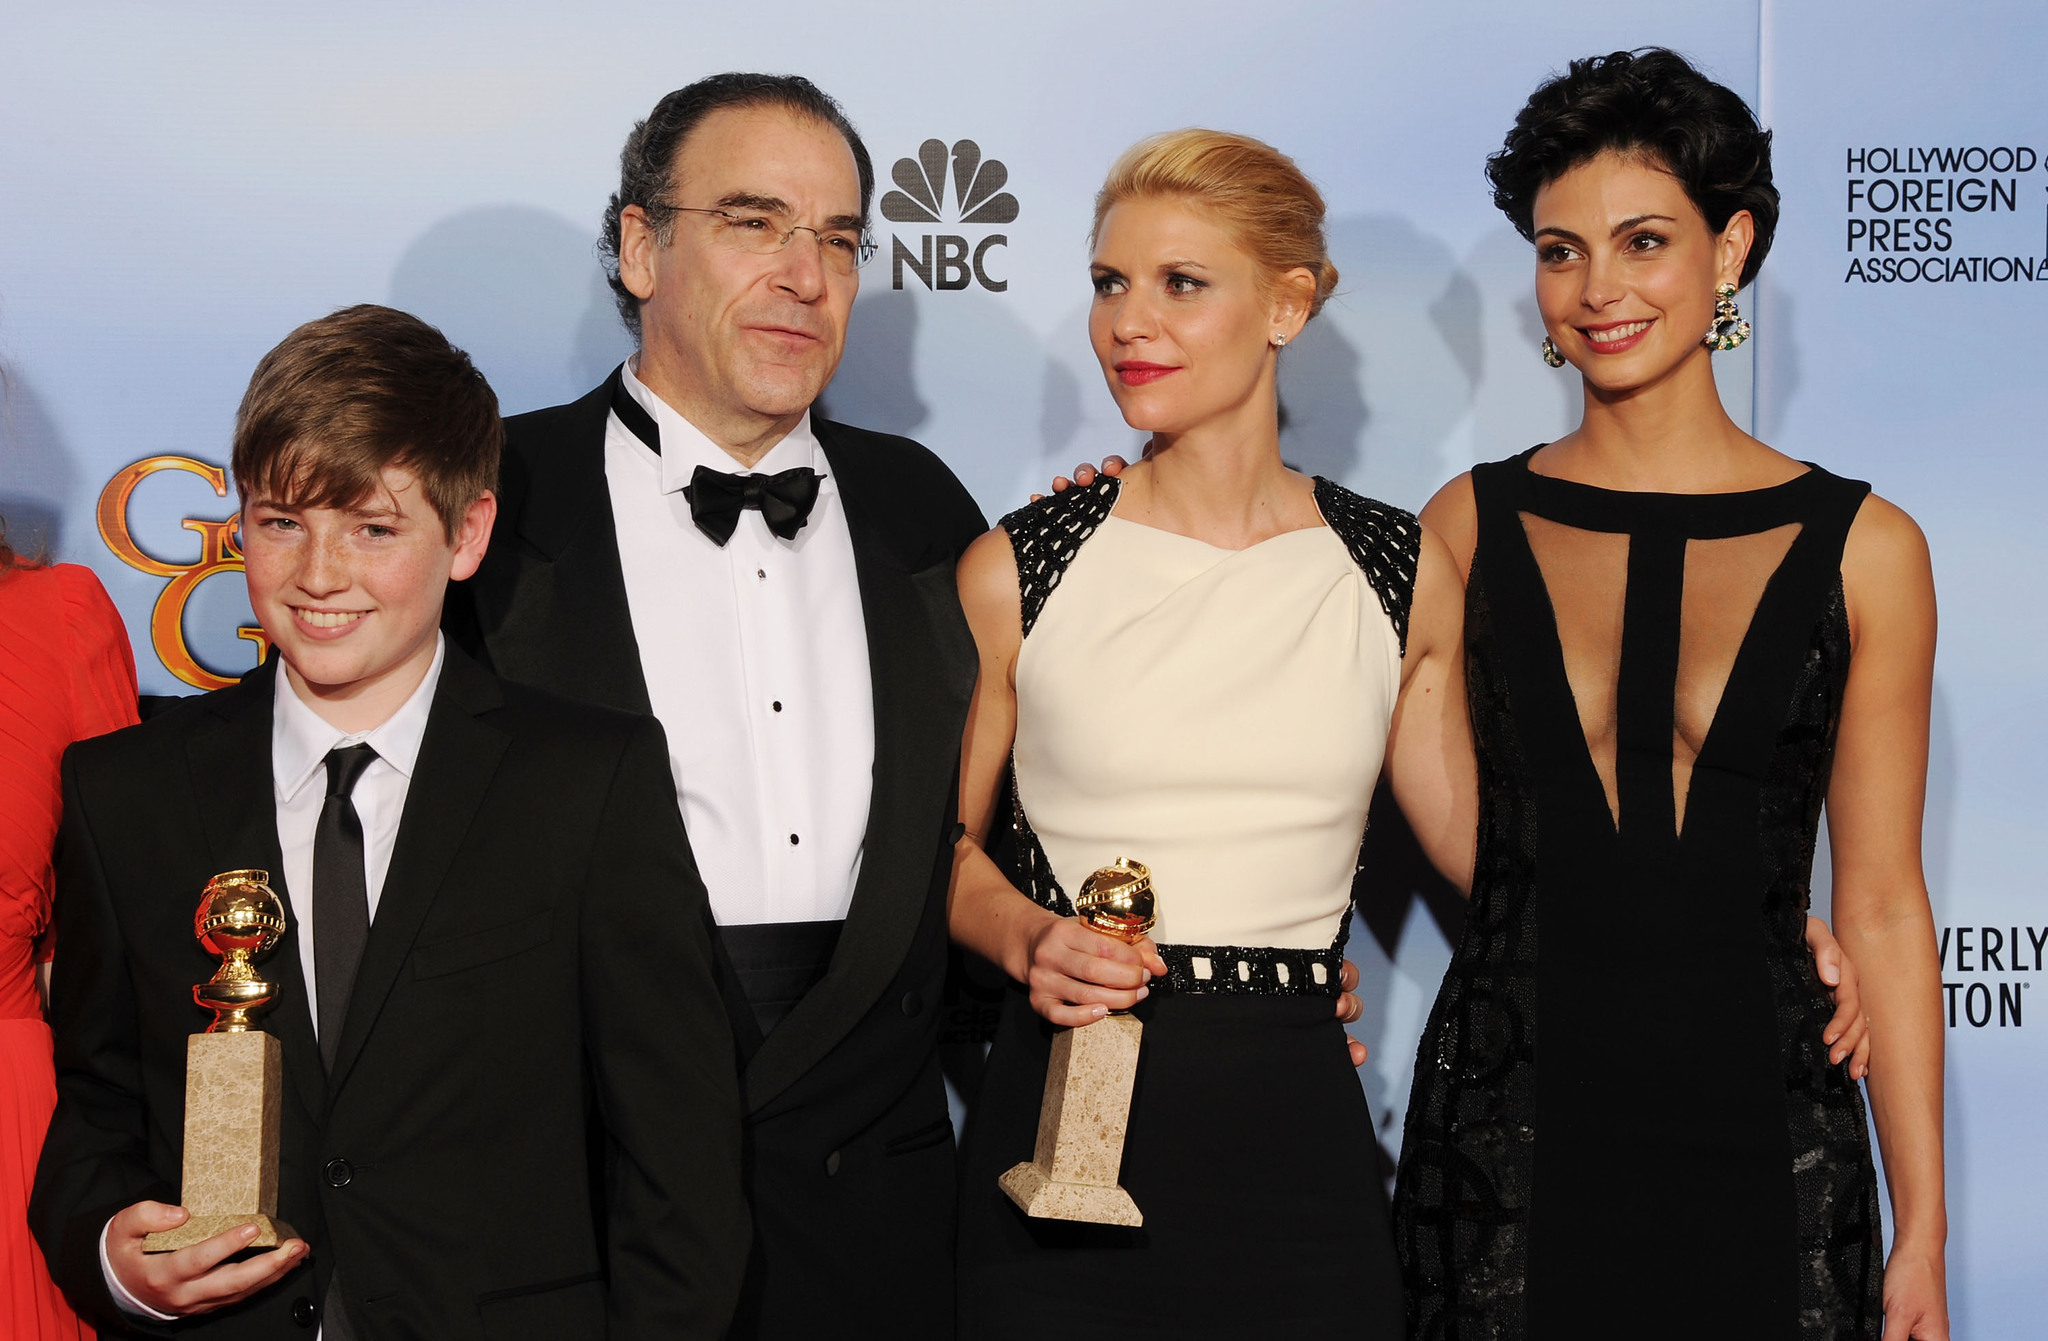 Claire Danes, Mandy Patinkin, Morena Baccarin and Jackson Pace